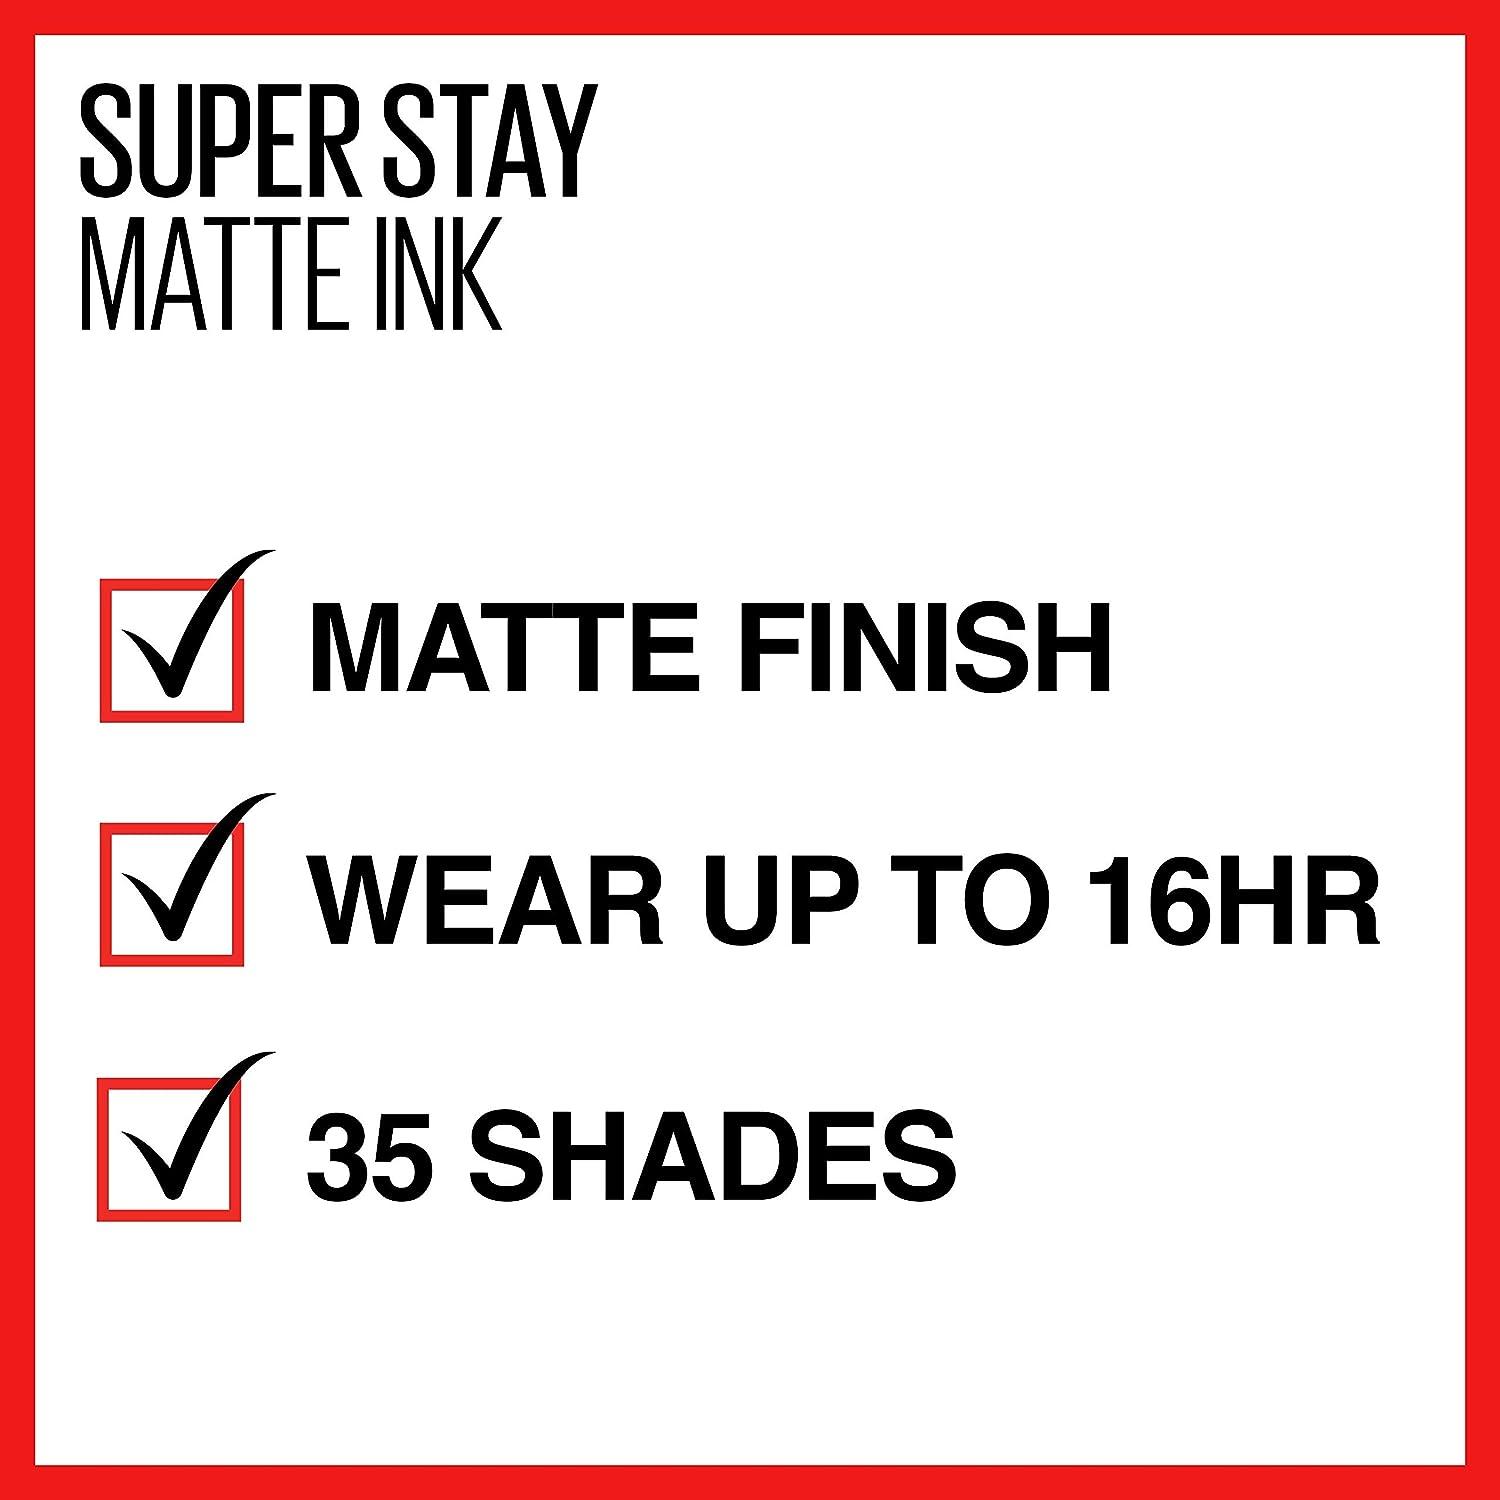 Maybelline Super Stay Matte Ink Liquid Lipstick Makeup, Long Lasting High  Impact Color, Up to 16H Wear, Composer, Cherry Brown, 1 Count